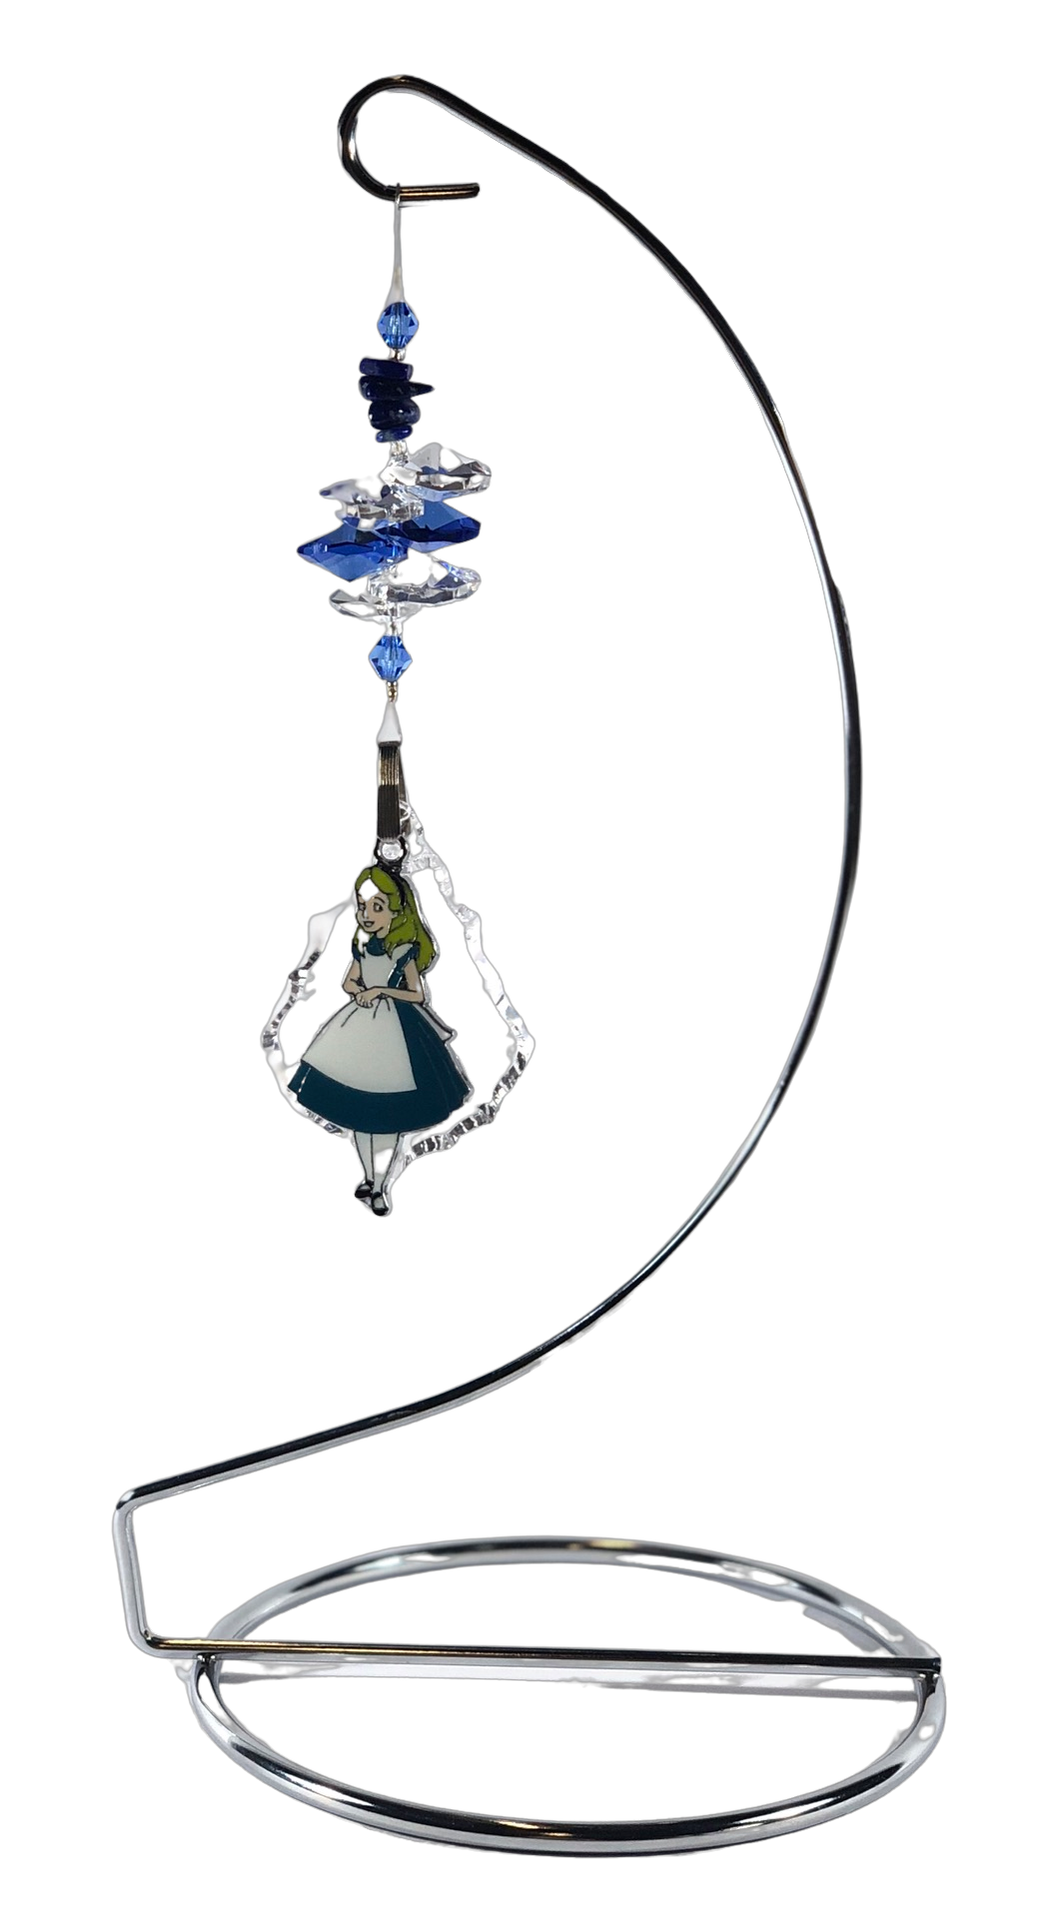 Alice in Wonderland - crystal suncatcher is decorated with lapis lazuli gemstones and come on this amazing stand.